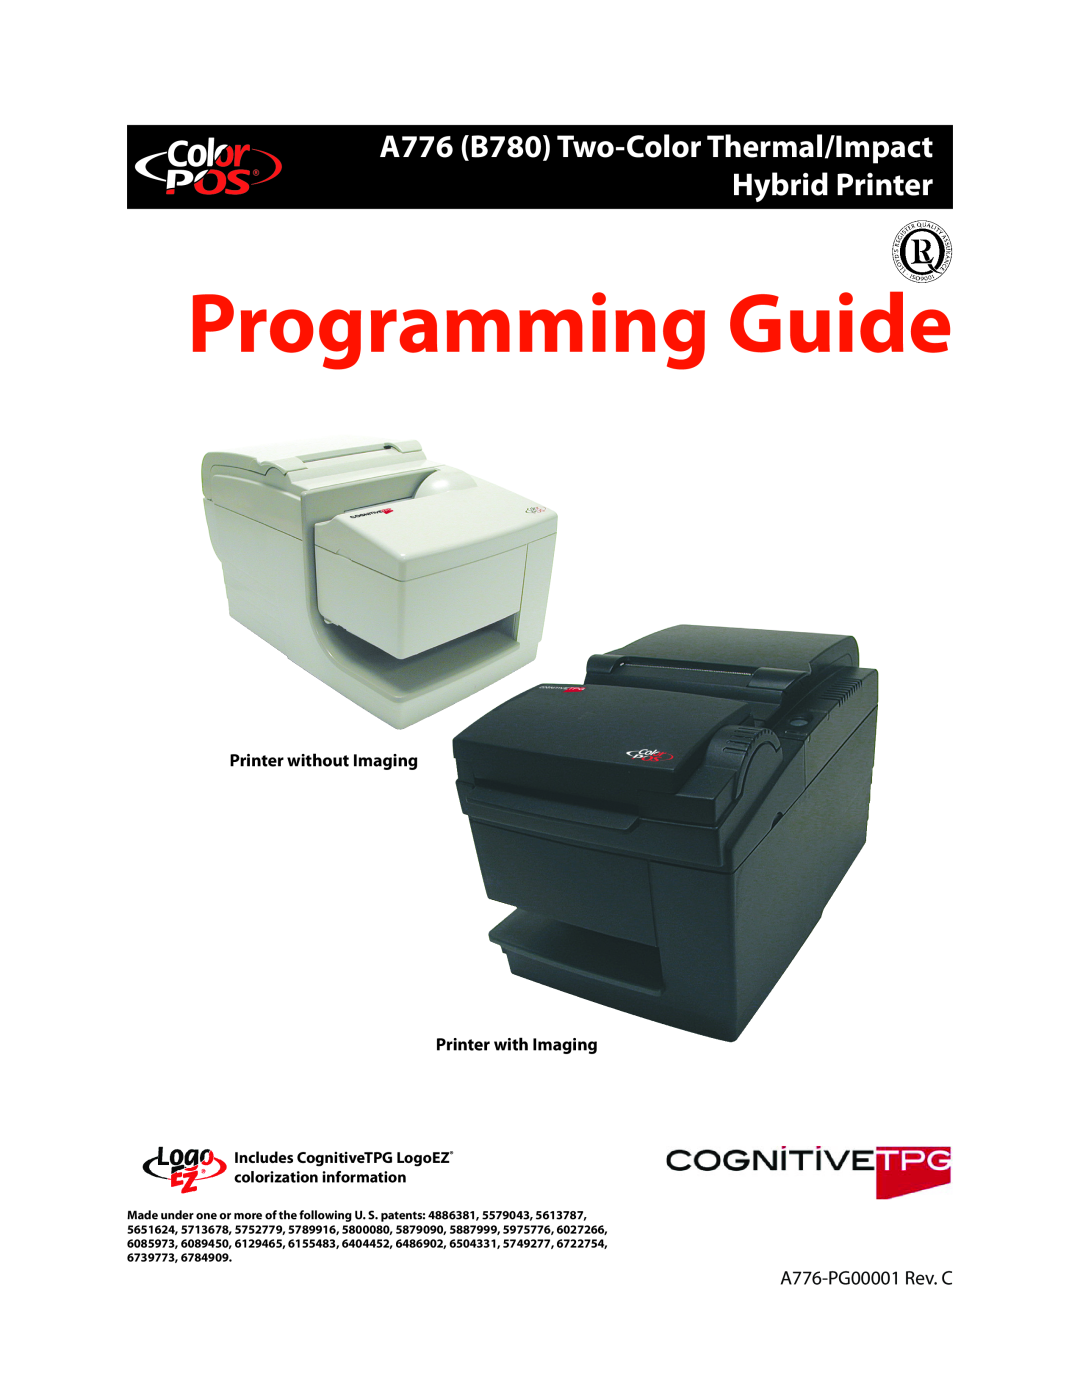 Cognitive Solutions manual A776 B780 Two-Color Thermal/Impact Hybrid Printer, Programming Guide, A776-PG00001 Rev. C 